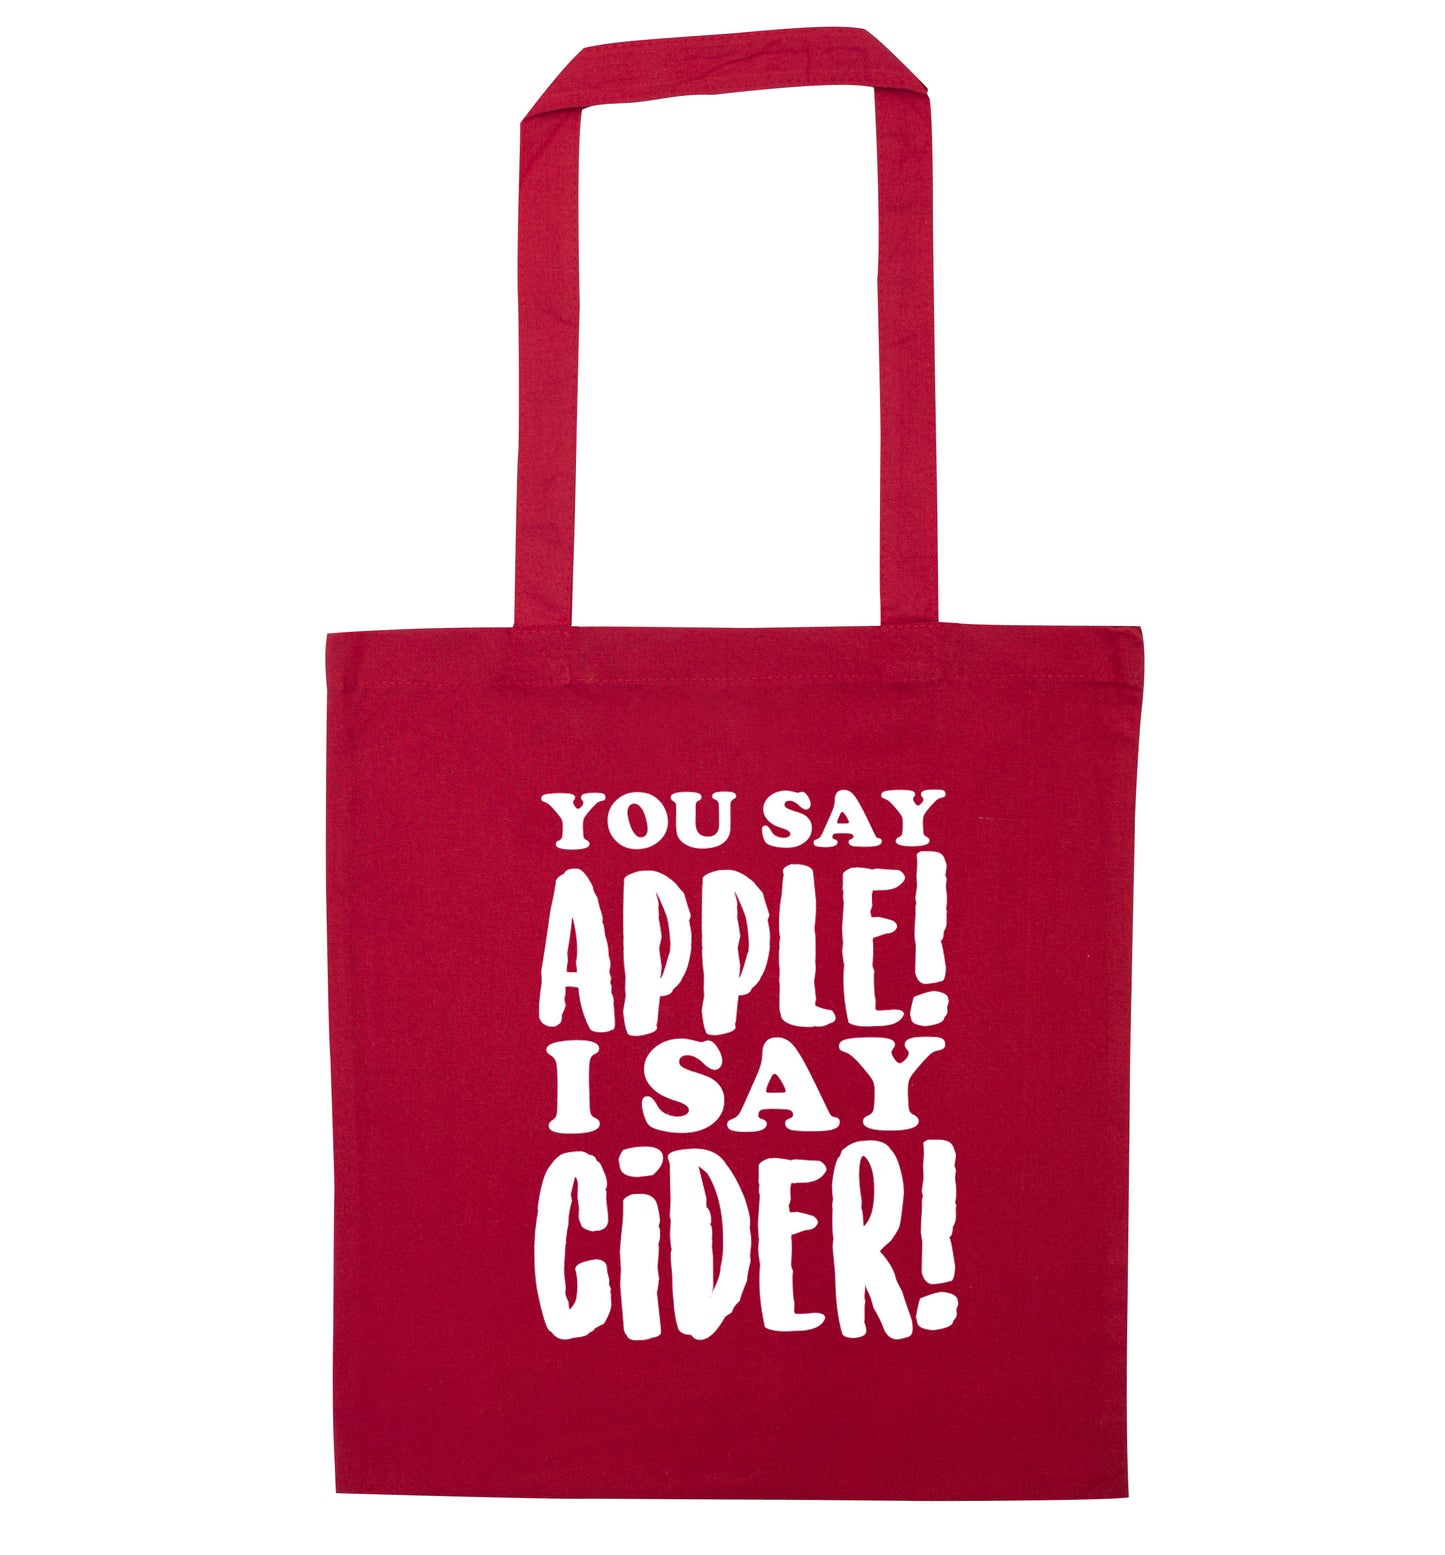 You say apple I say cider! red tote bag